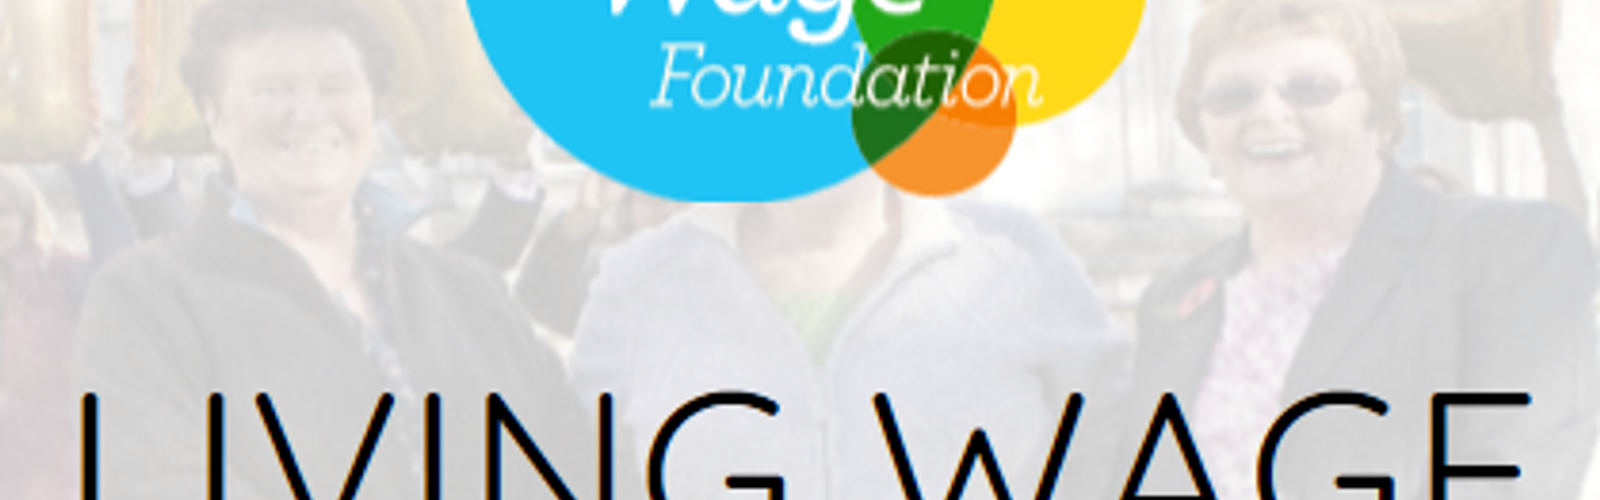 LIving Wage Foundation.PNG